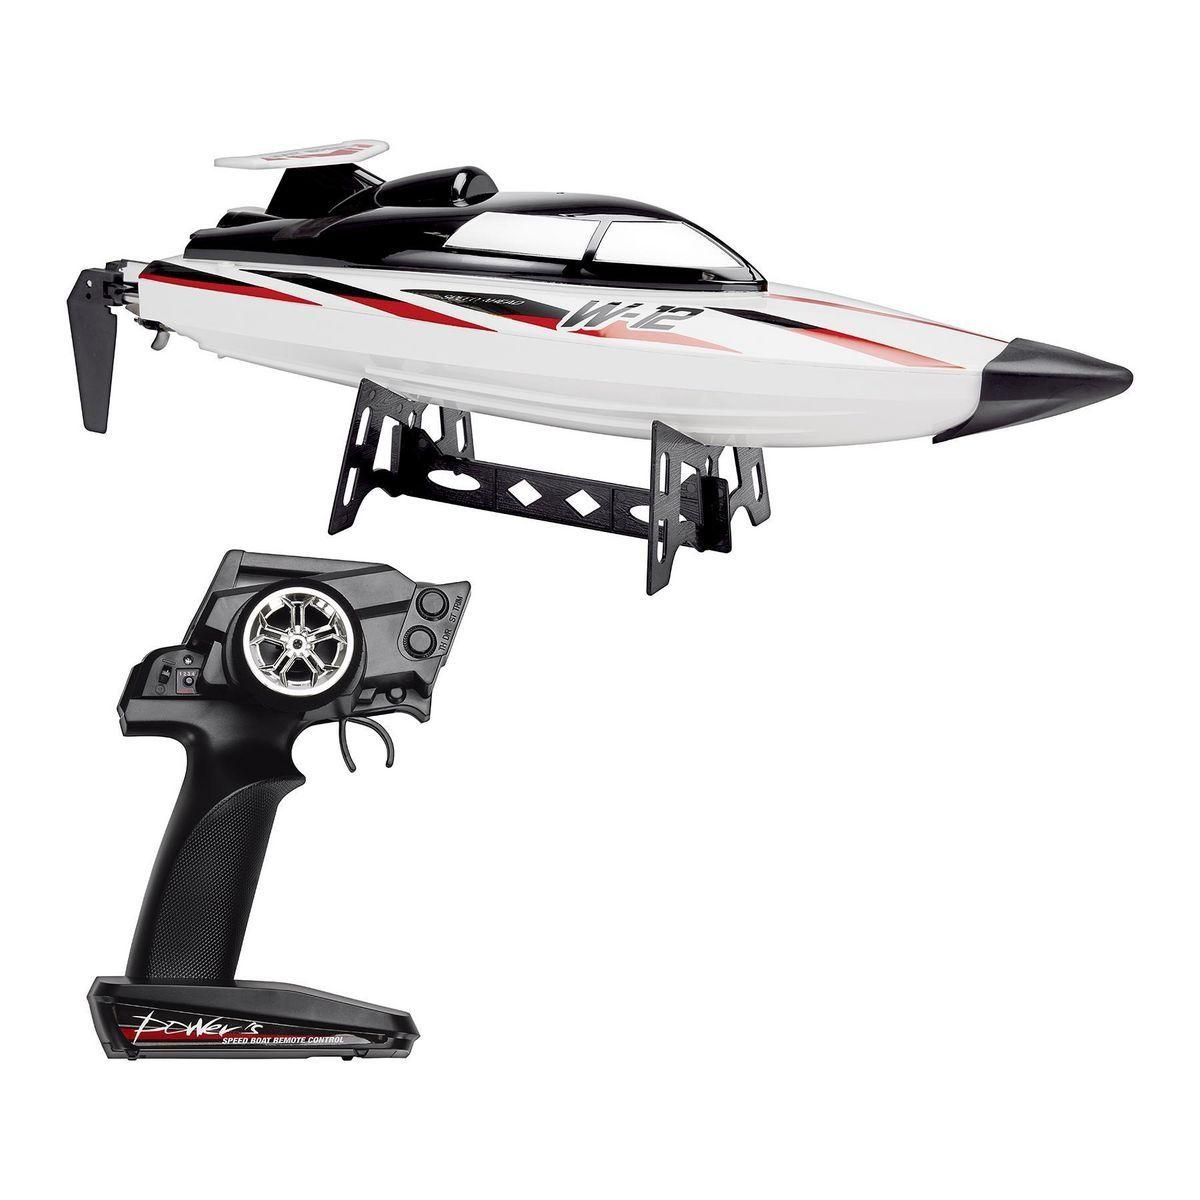 Remote Control Boat Smyths: Important safety considerations for using remote control boats.